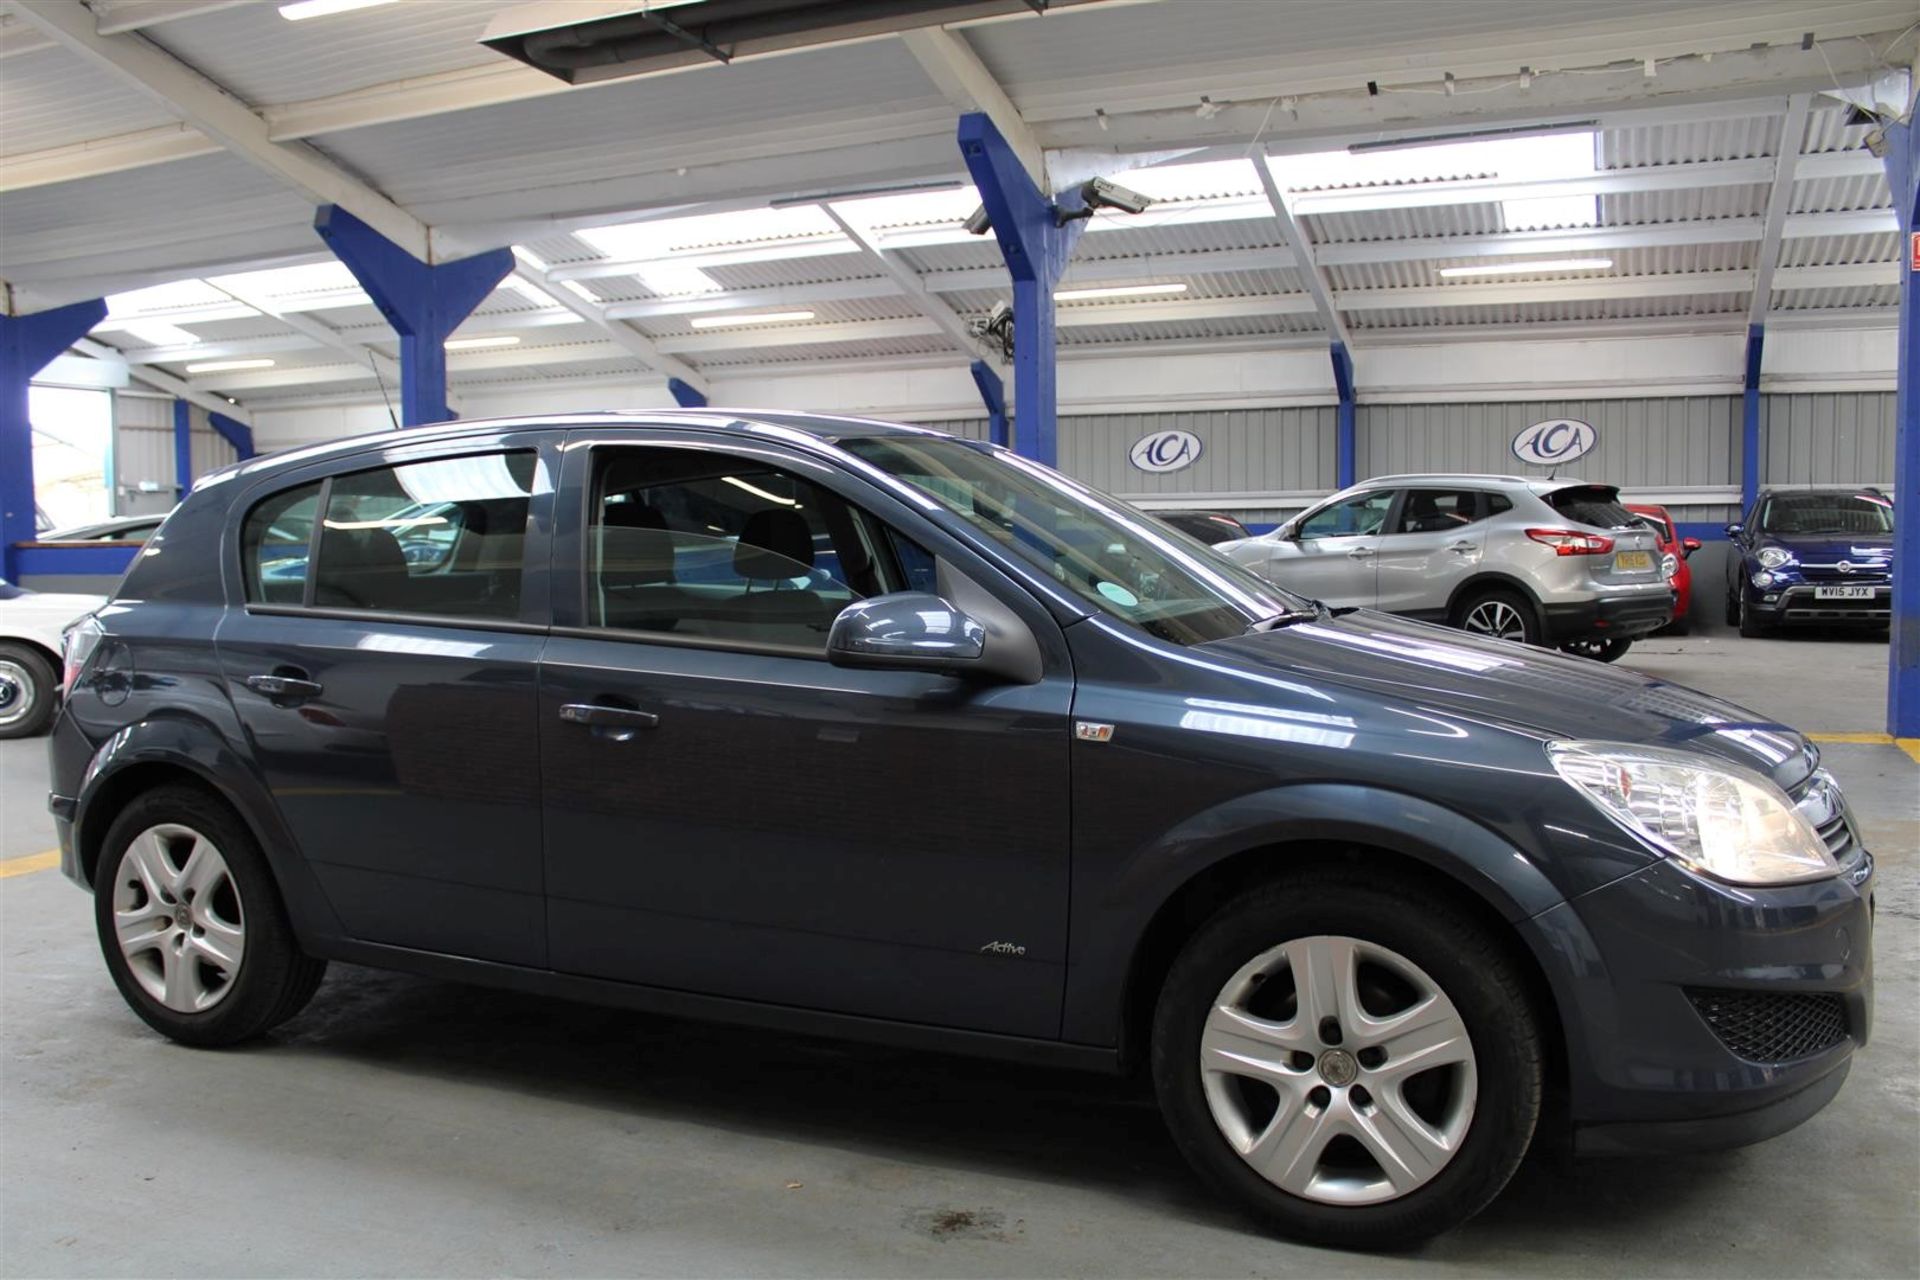 59 09 Vauxhall Astra Active - Image 25 of 27